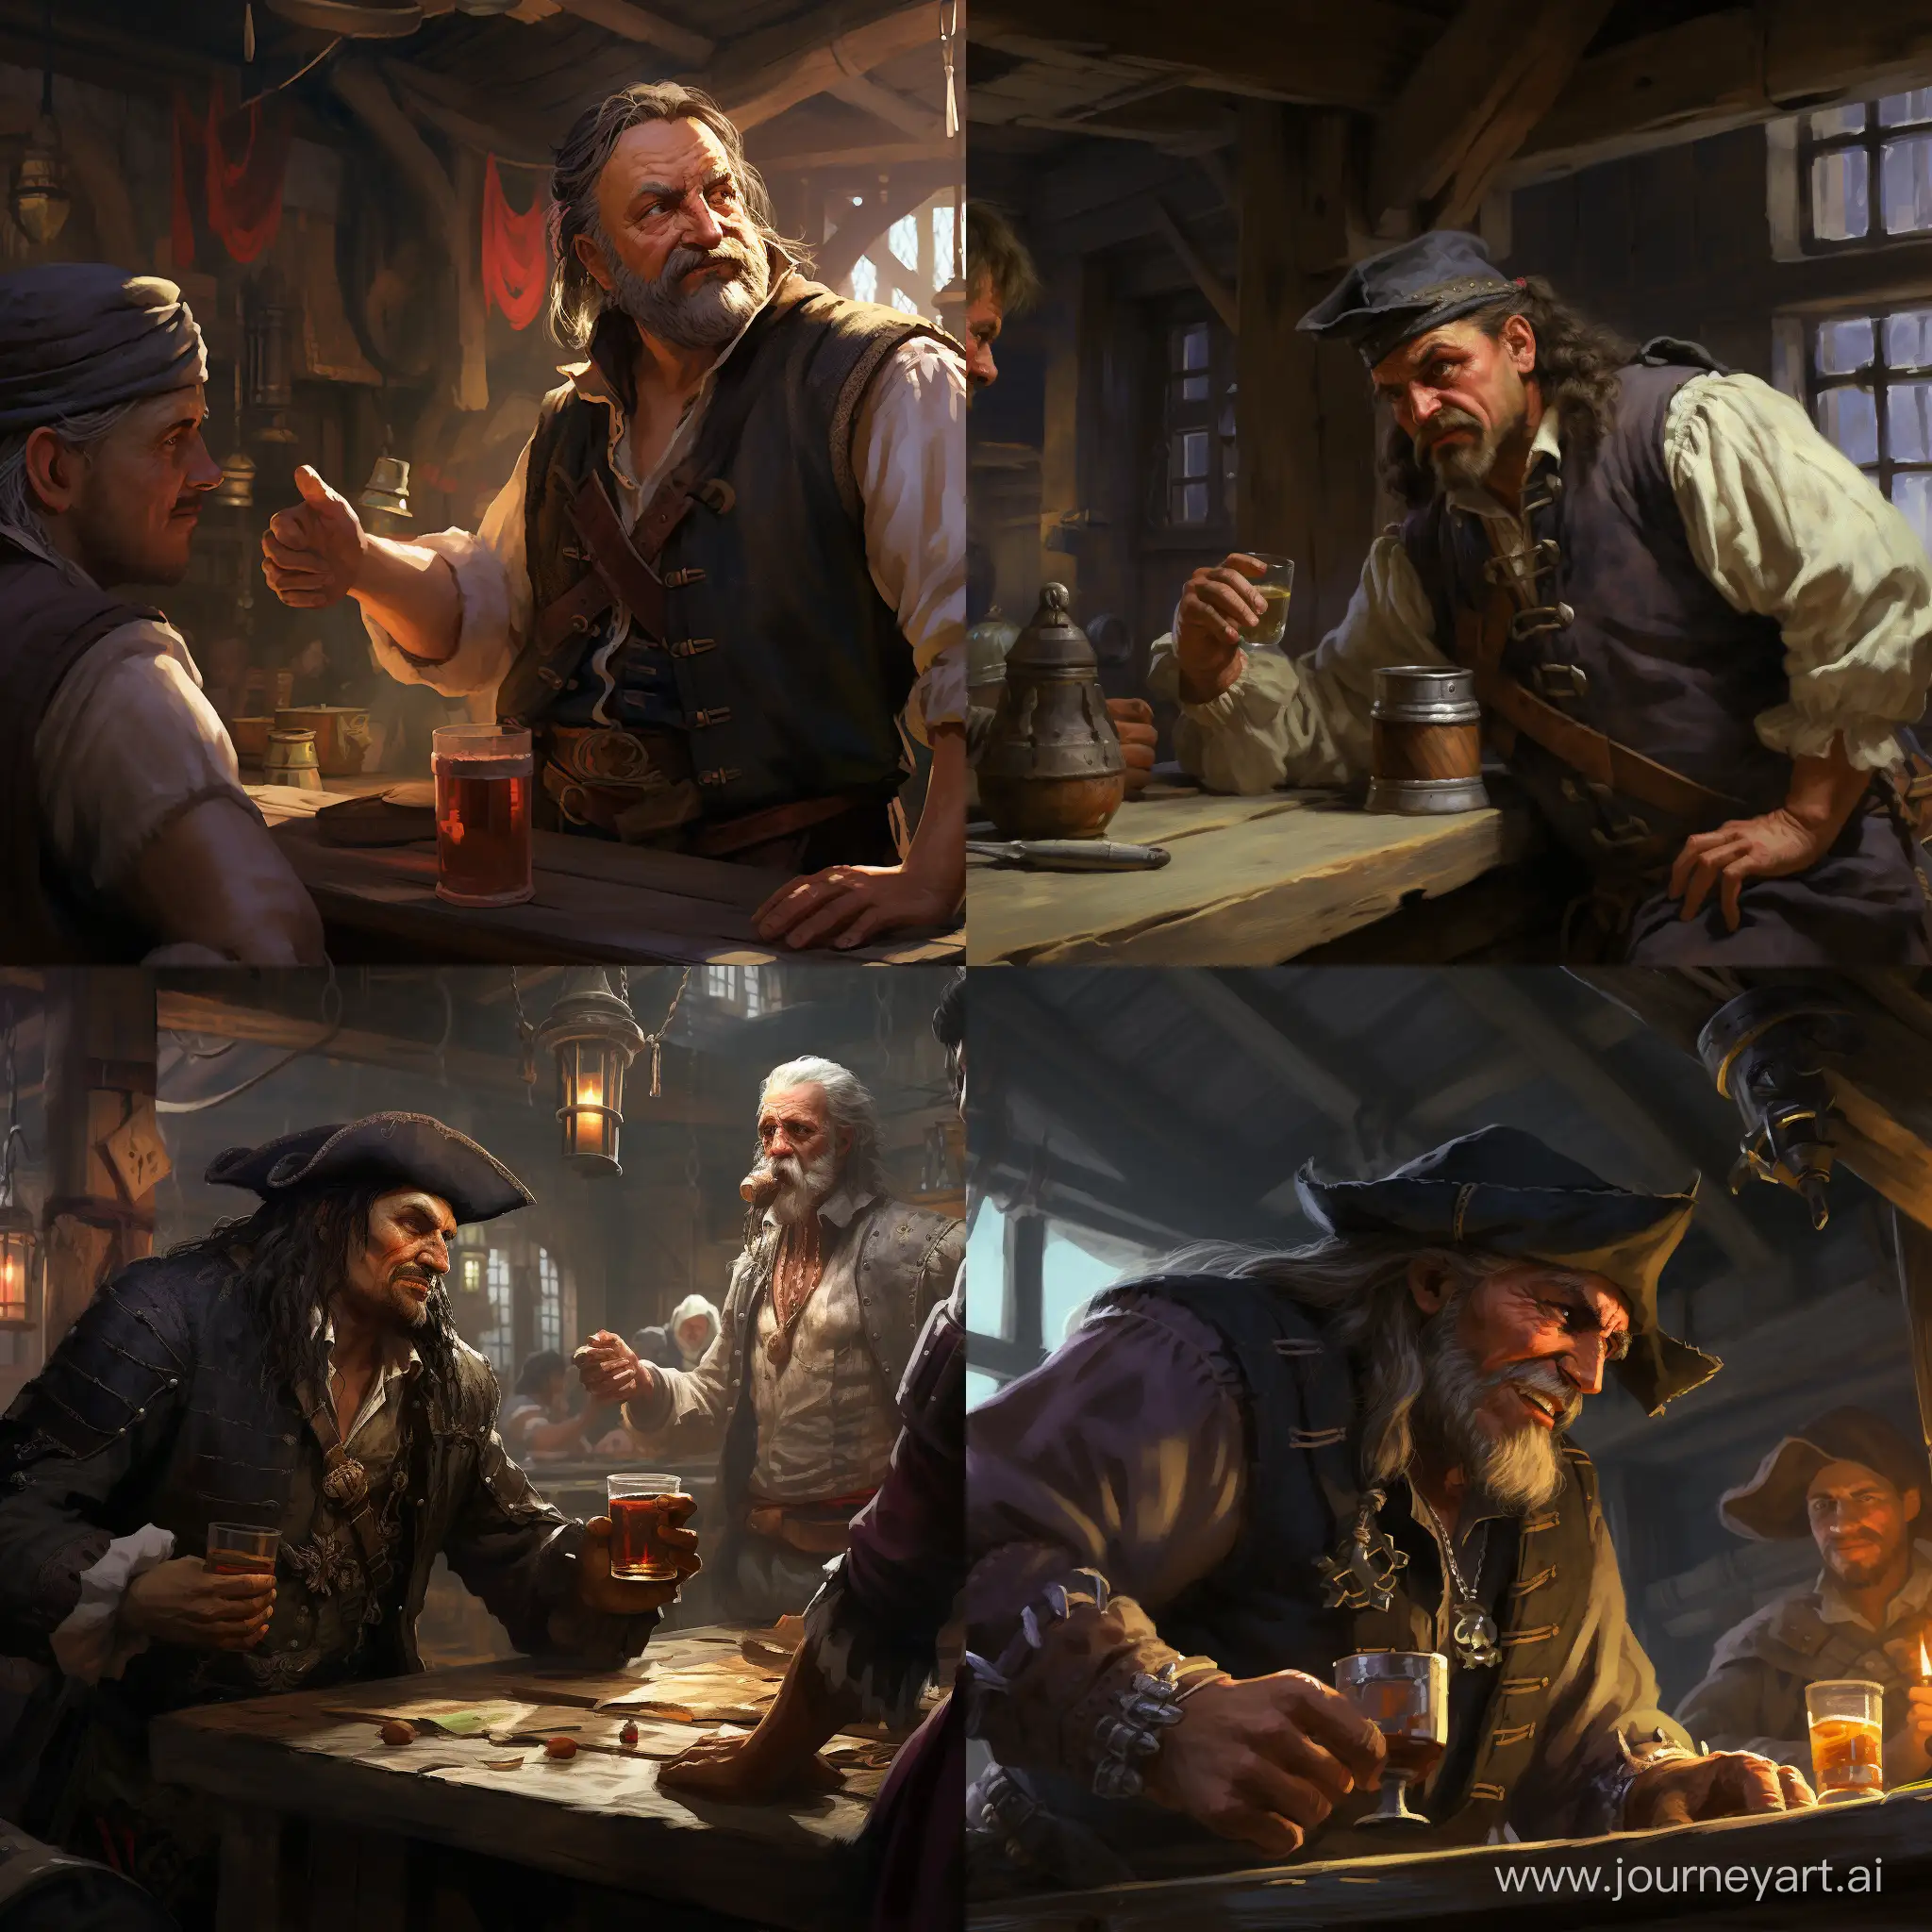 OneEyed-Pirate-Engages-in-Conversation-with-the-Tavern-Owner